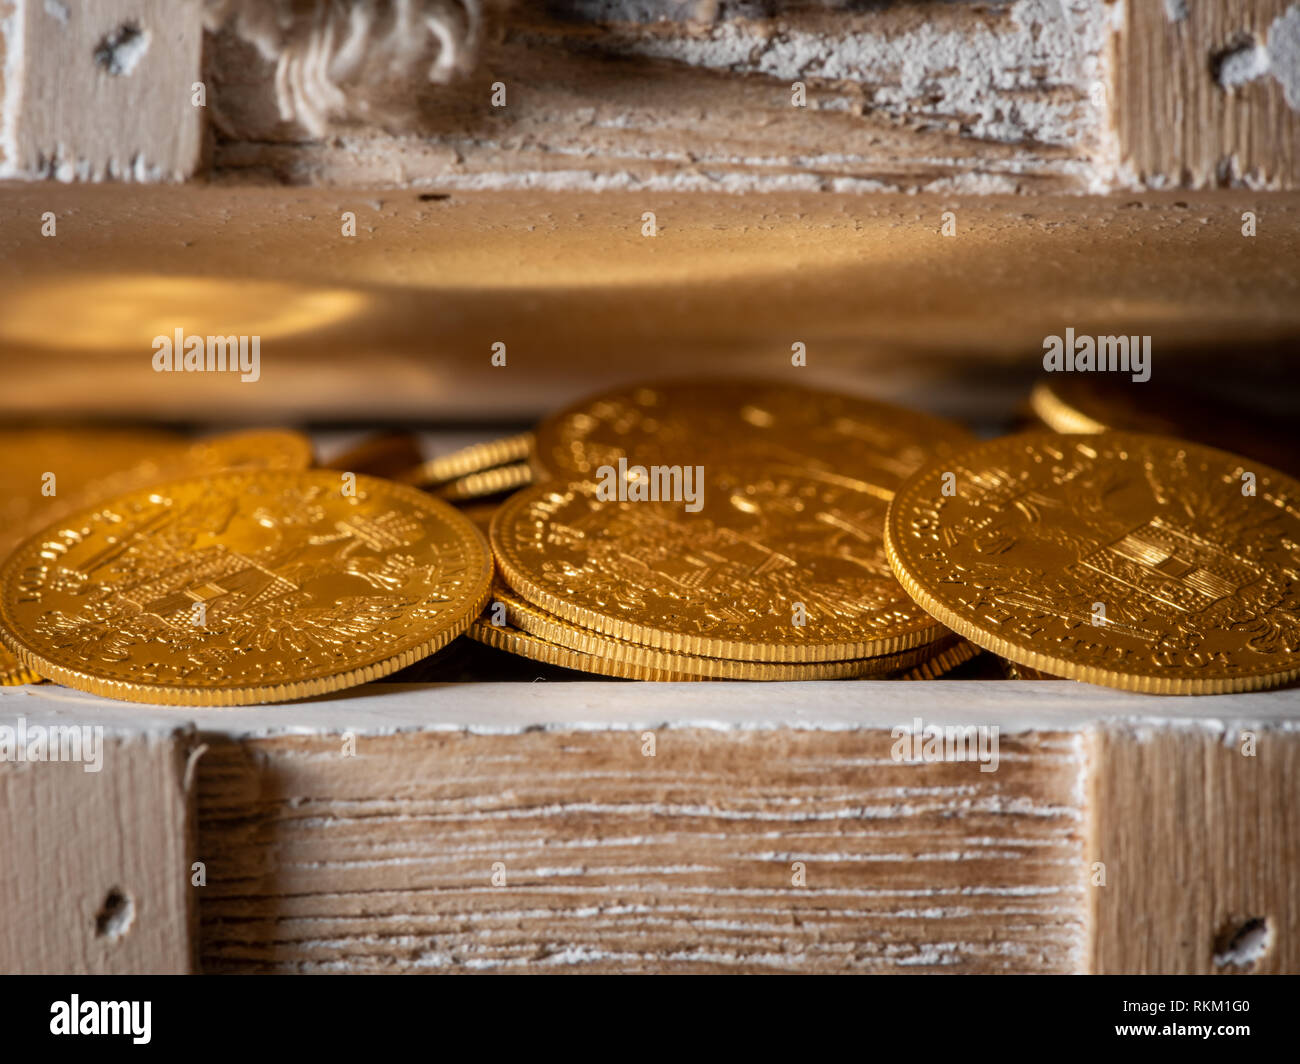 Shiny gold coins (Austrian ducats) in a small wooden treasure box Stock Photo